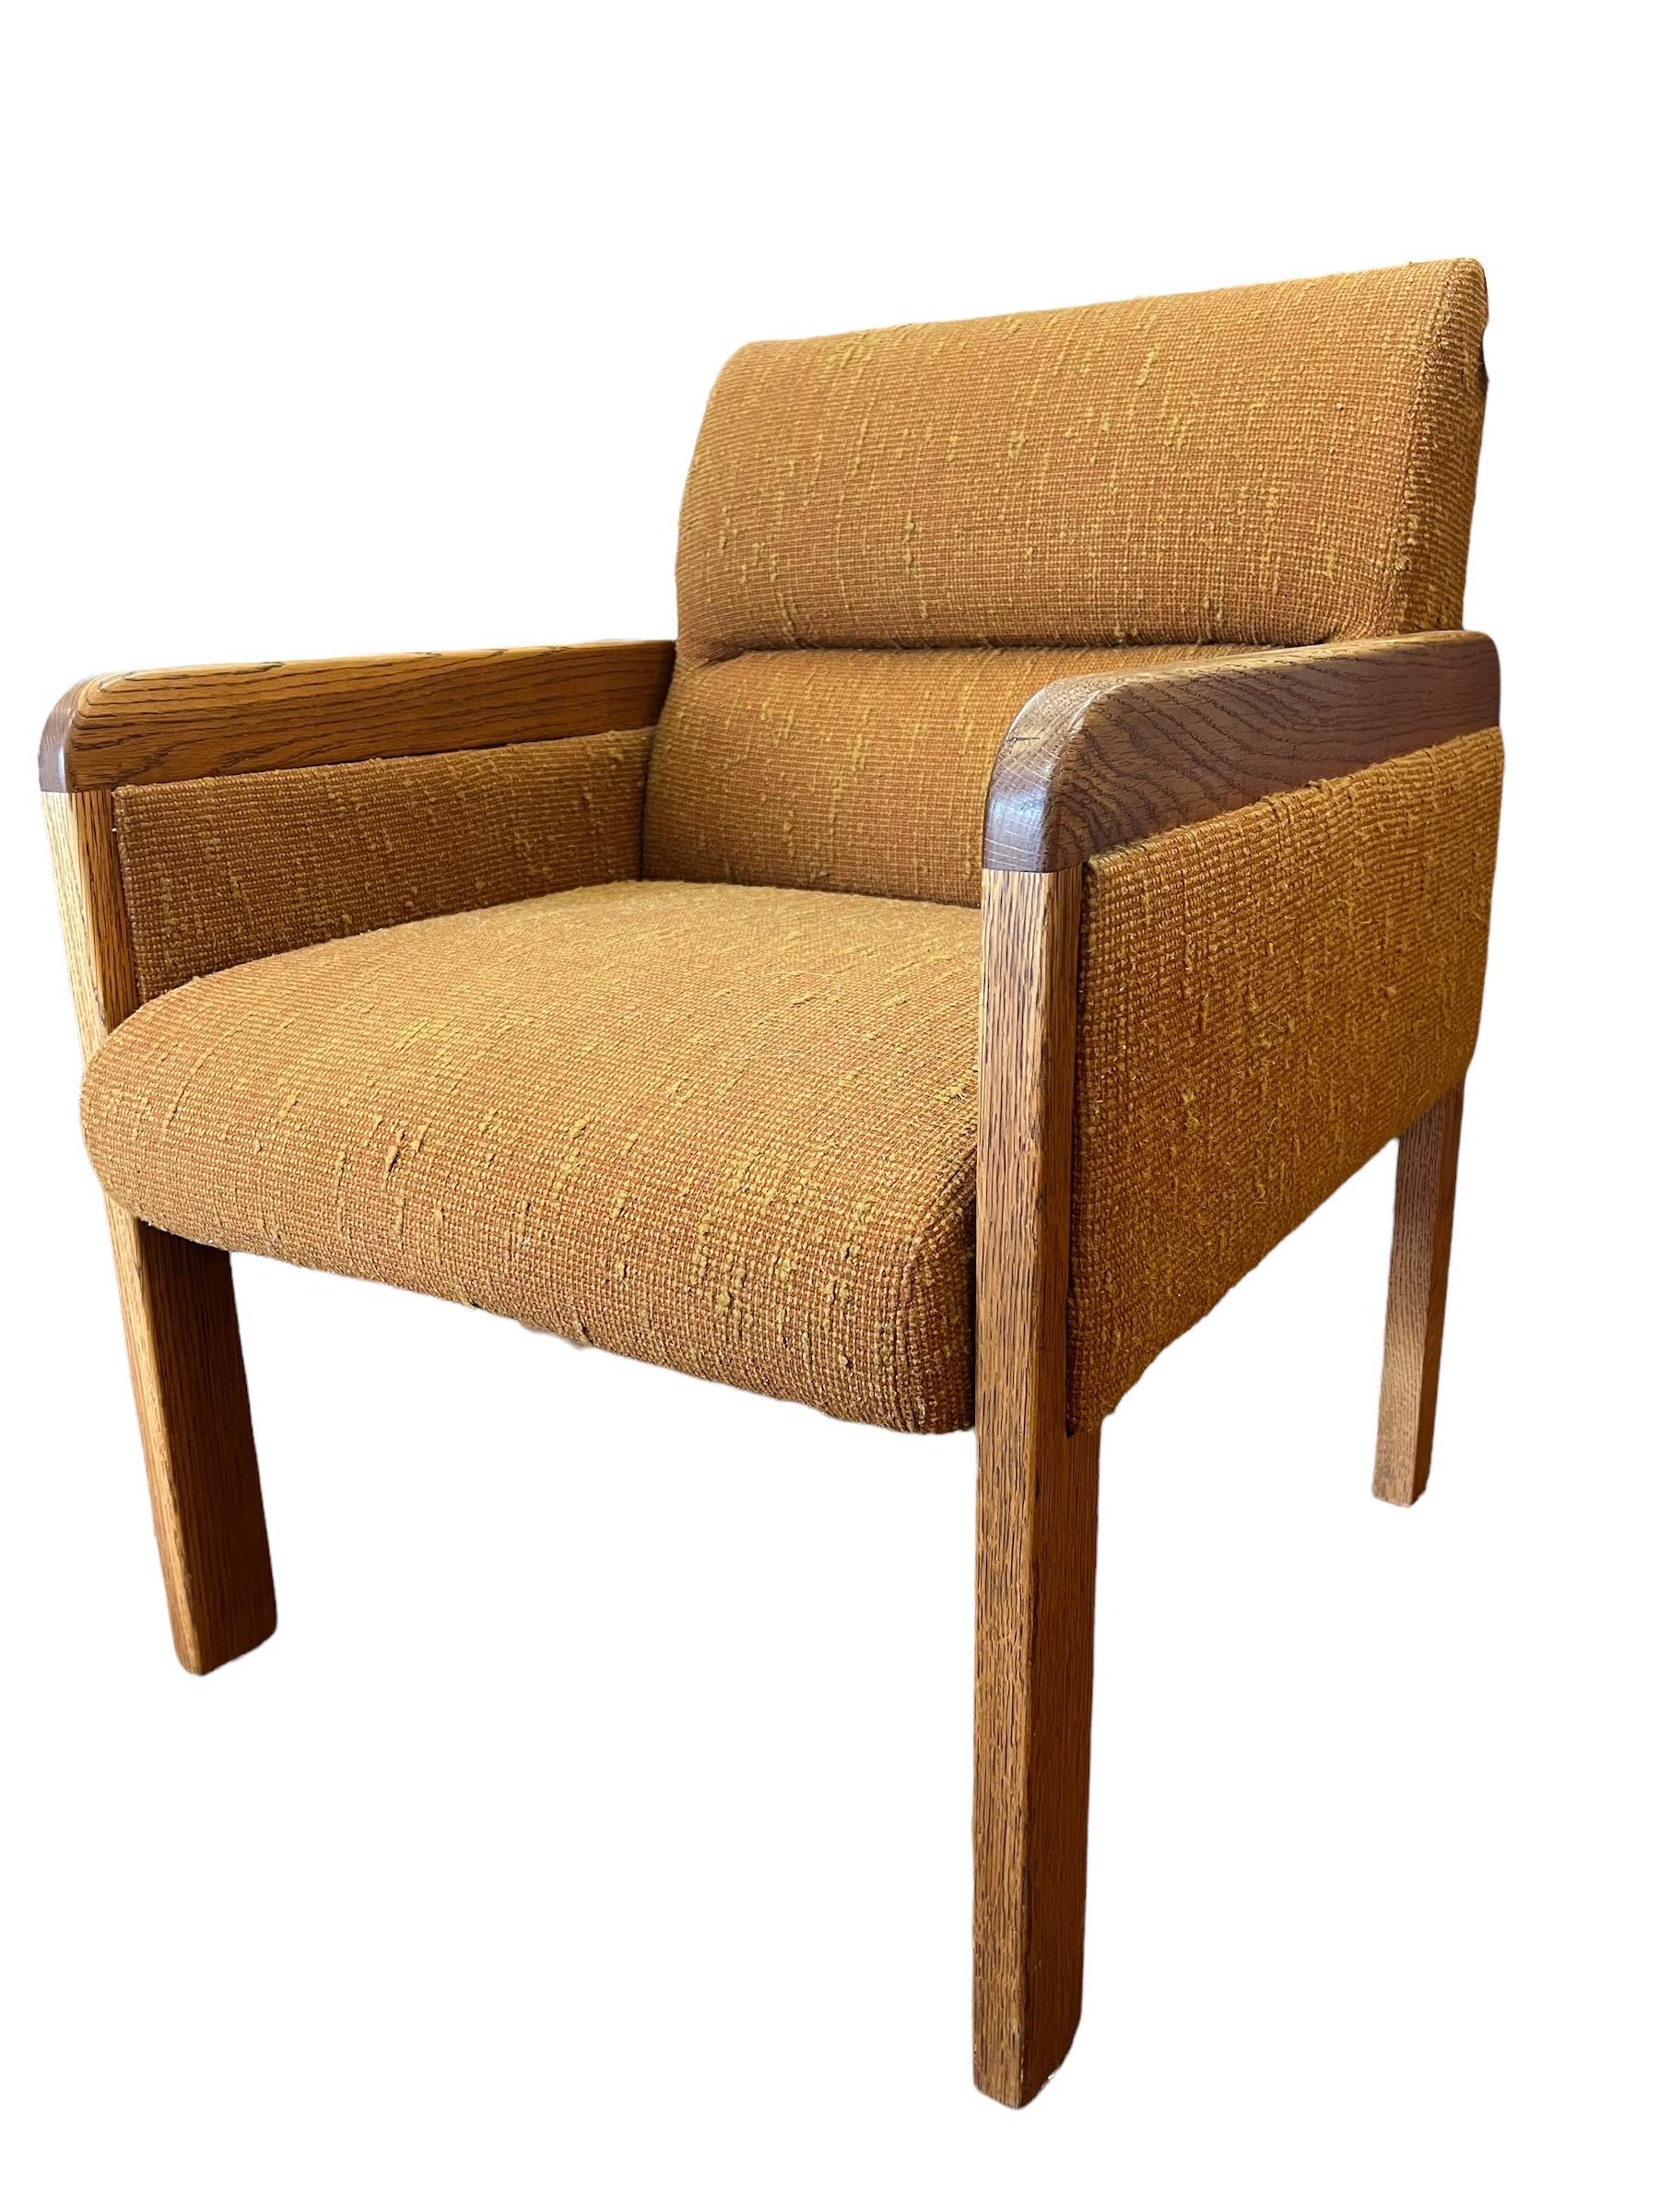 Vintage Solid Oak Upholstered Mid-Century Modern Sofa Chair In Good Condition For Sale In Seattle, WA